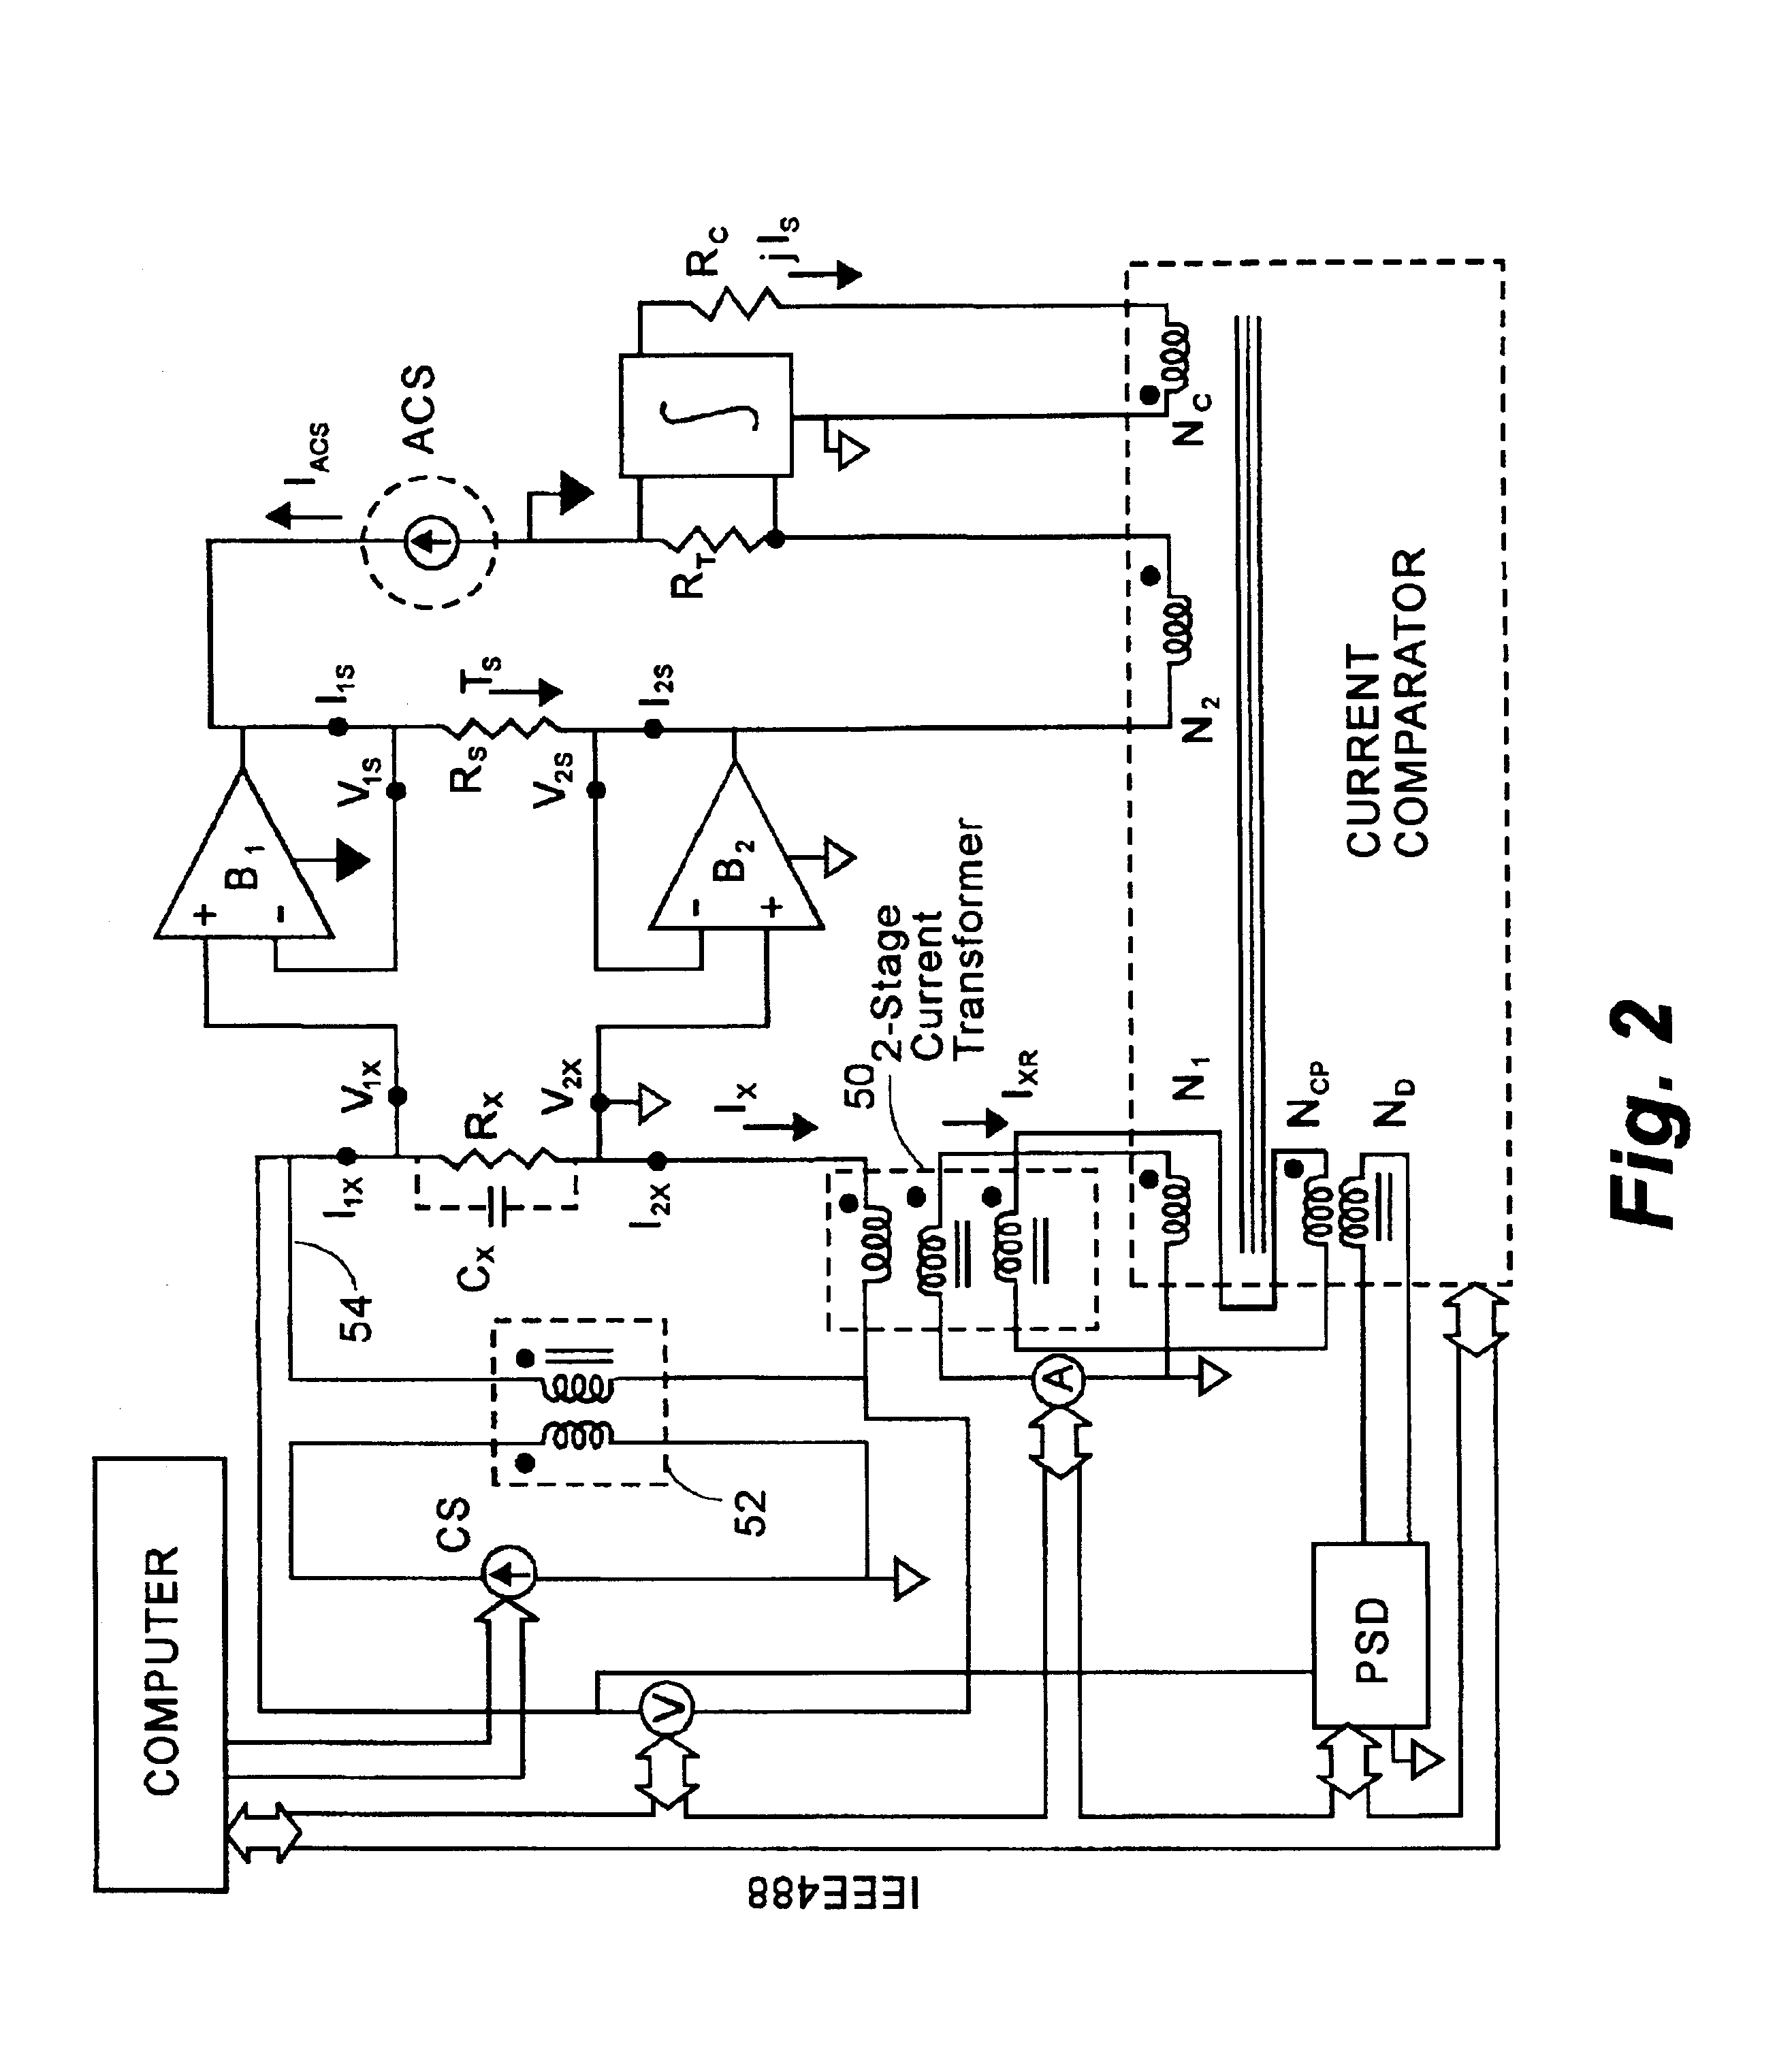 Current-comparator-based four-terminal resistance bridge for power frequencies